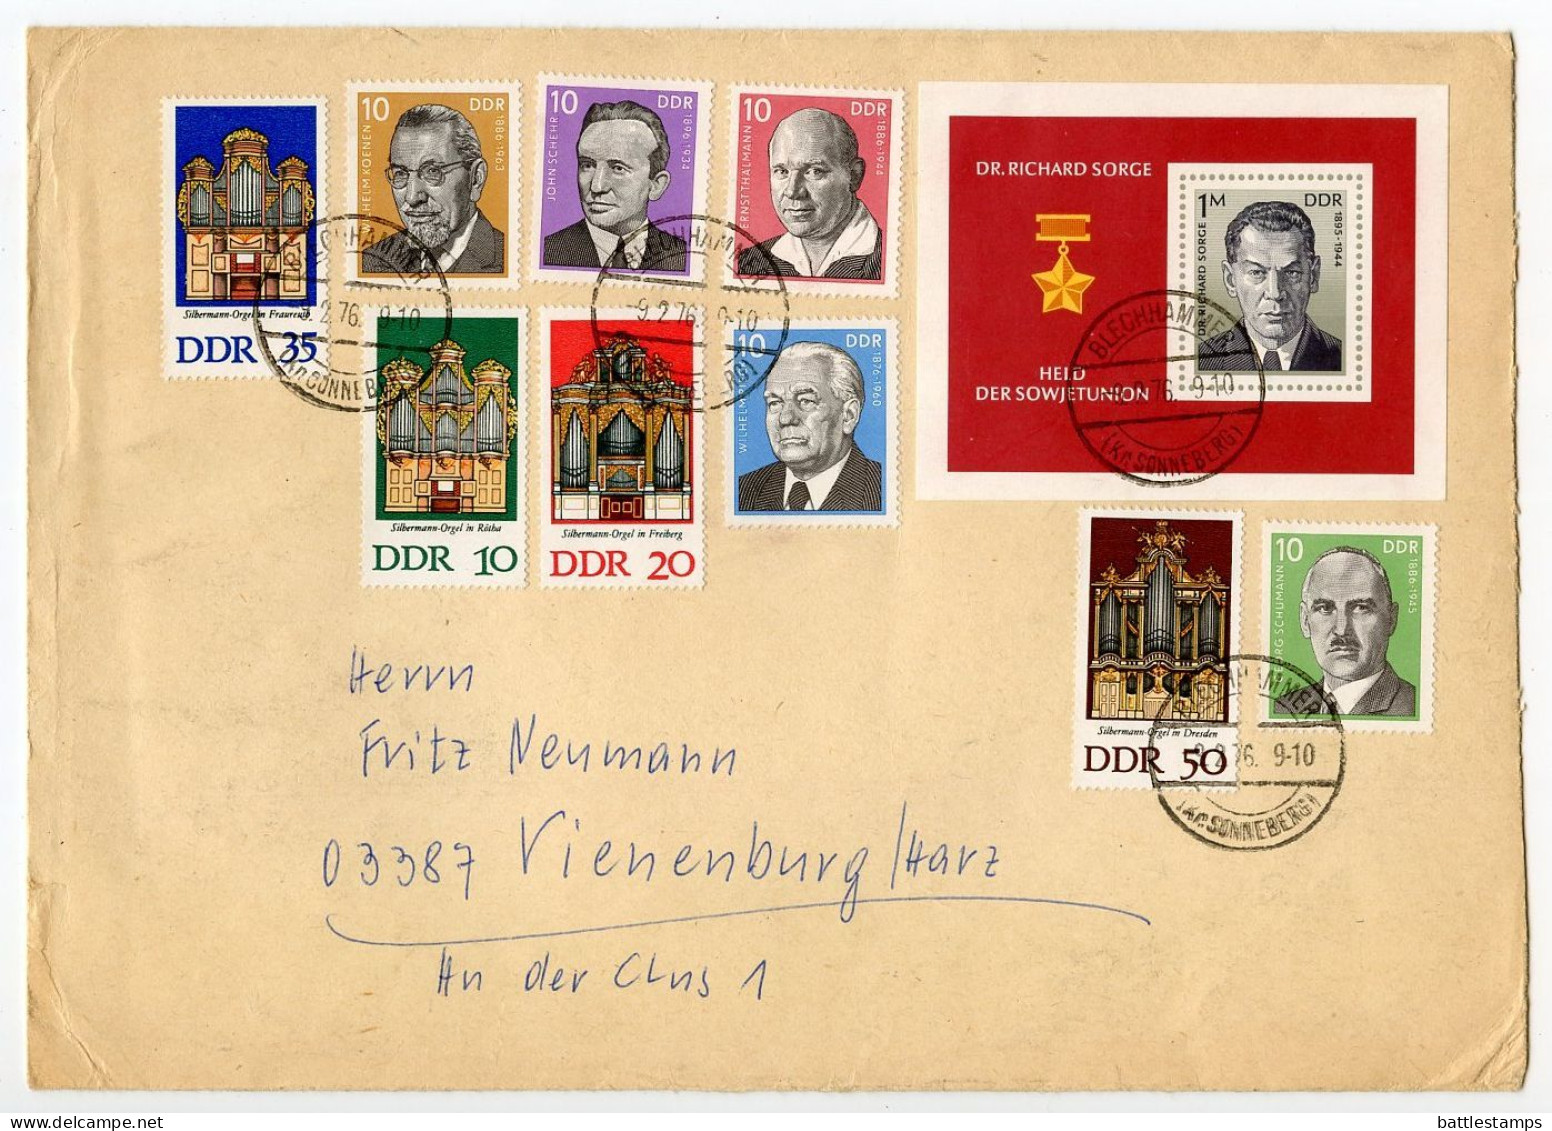 Germany East 1976 Cover; Blechhammer To Vienenburg; Stamps - Silberman Organs, Sorge S/S, President Pieck, Labor Leaders - Lettres & Documents